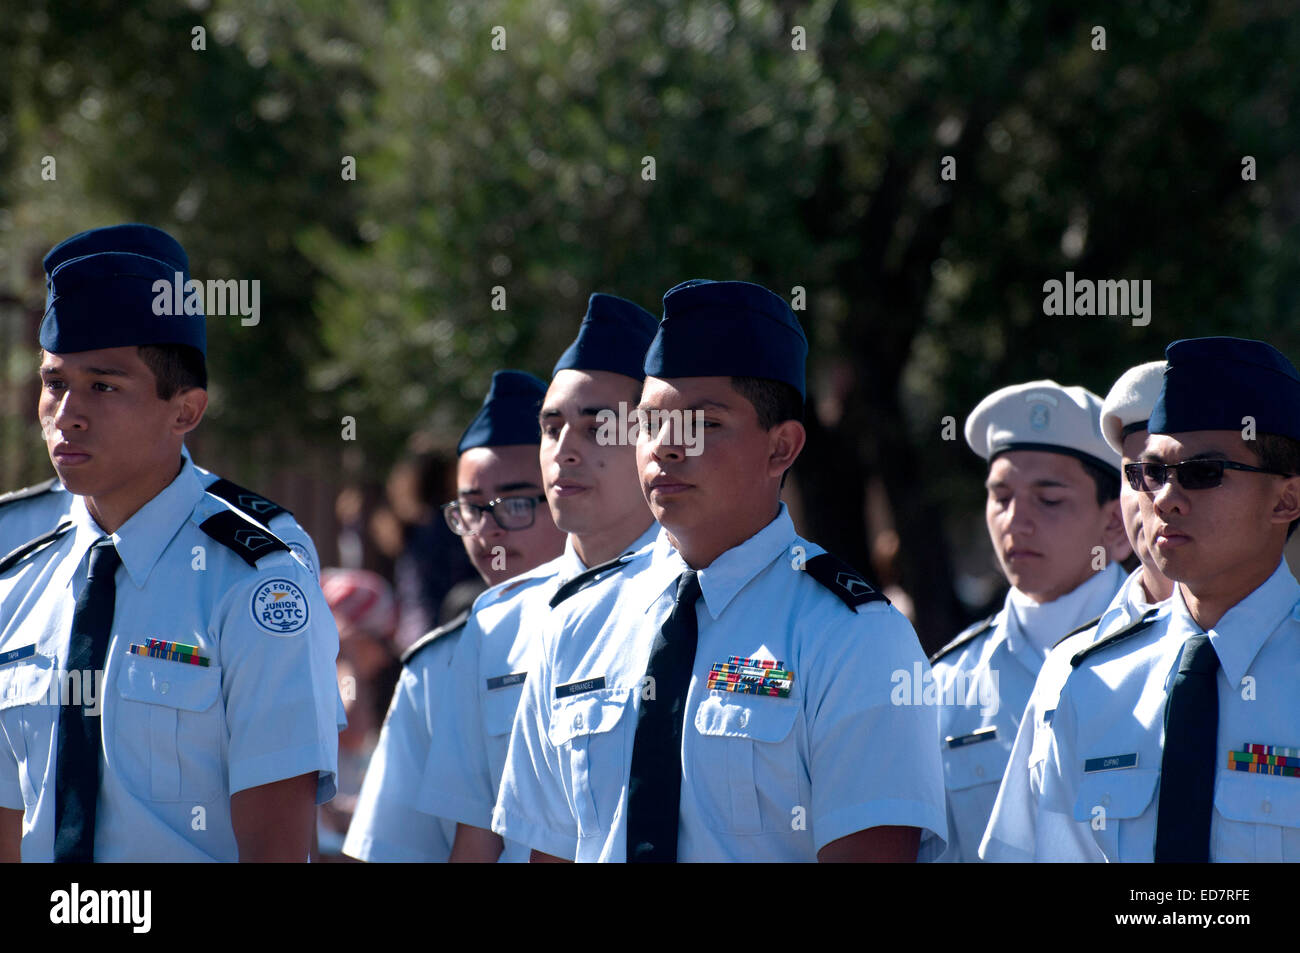 What is high school ROTC?